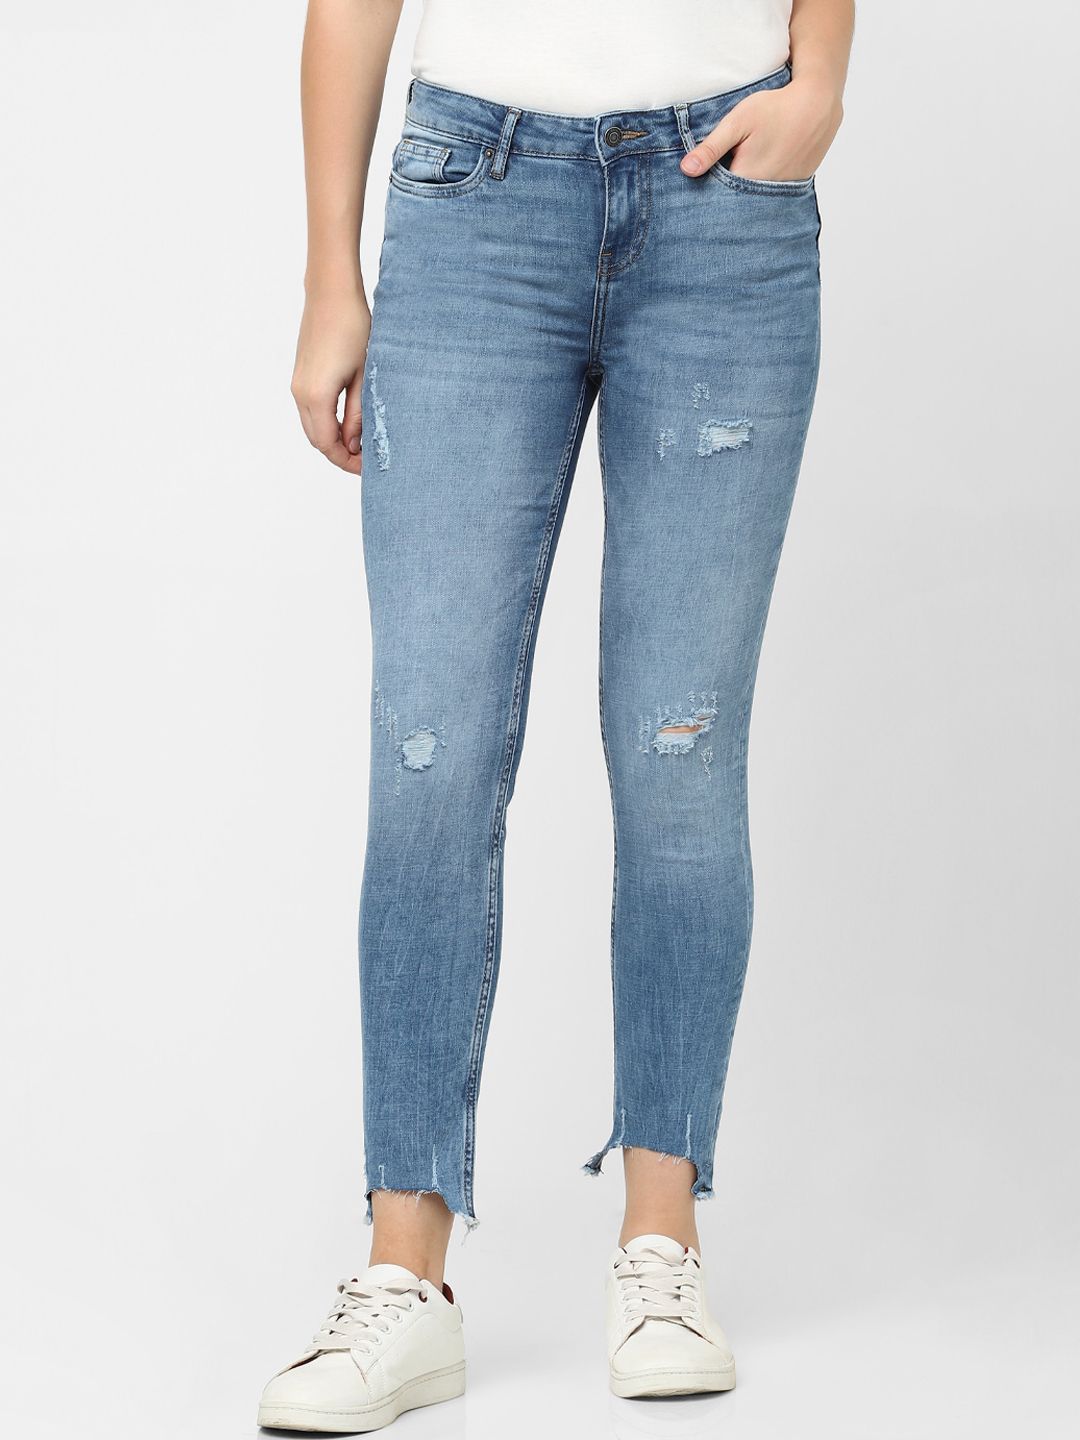 Vero Moda Women Blue Slim Fit Mildly Distressed Light Fade Cropped Cotton Jeans Price in India